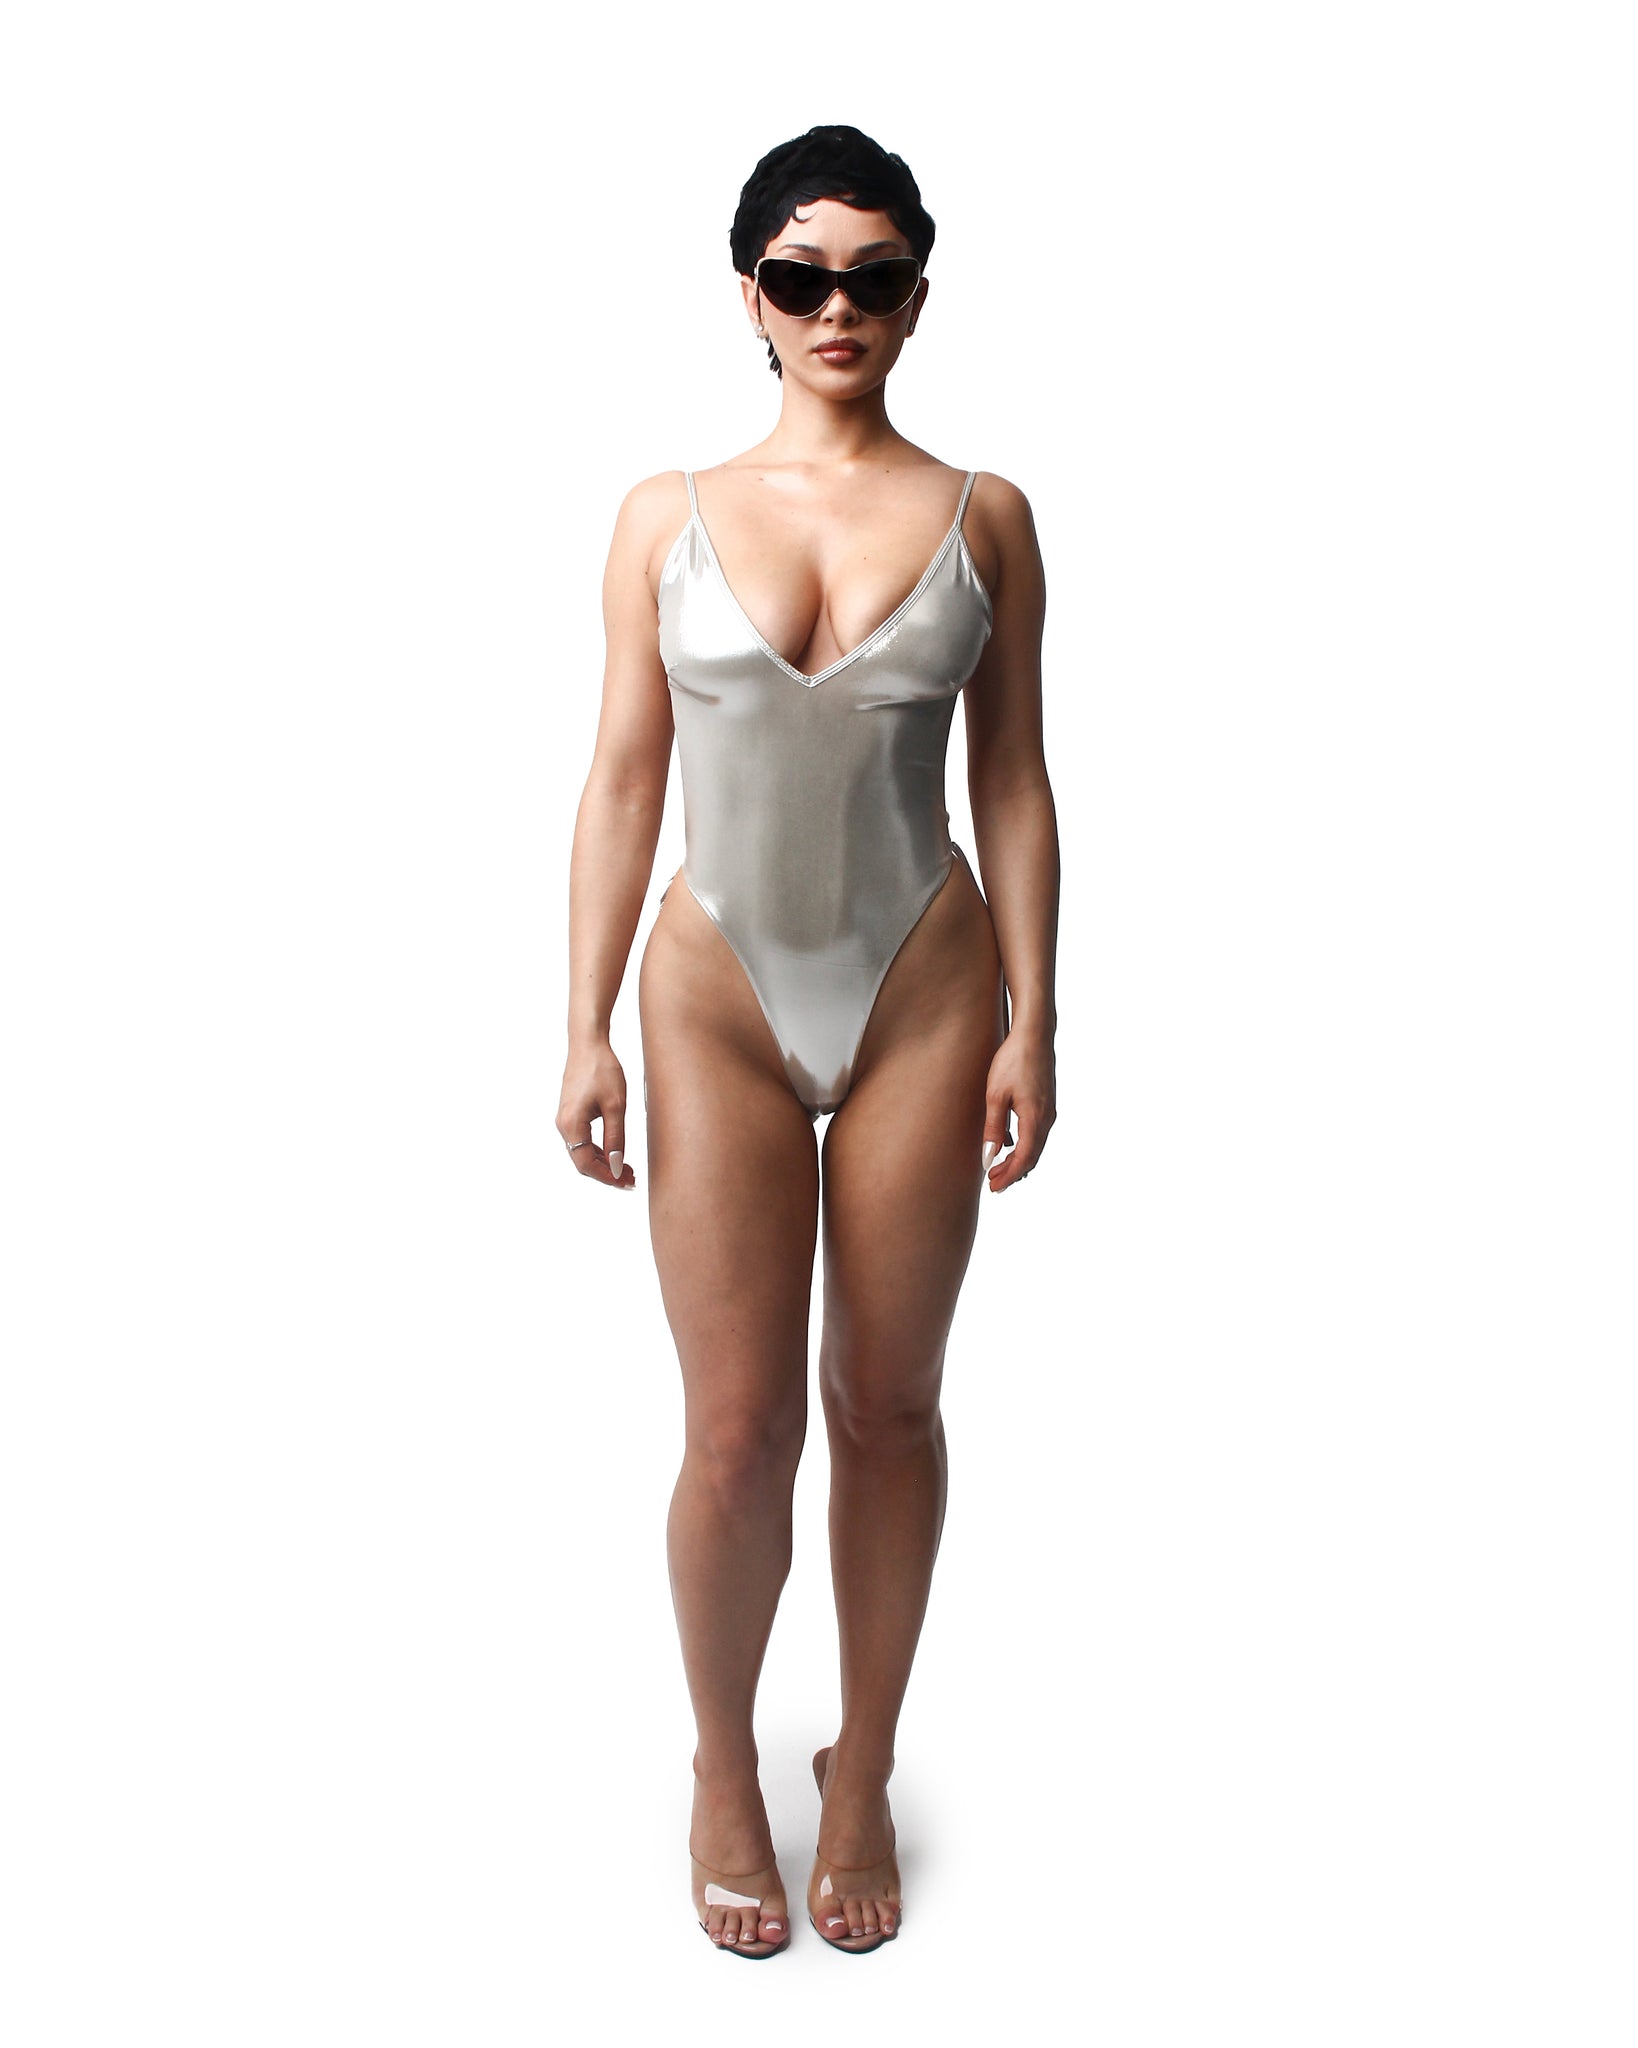 silver one piece bikini, V cut with a perfect design for curvy models and bigger breasted